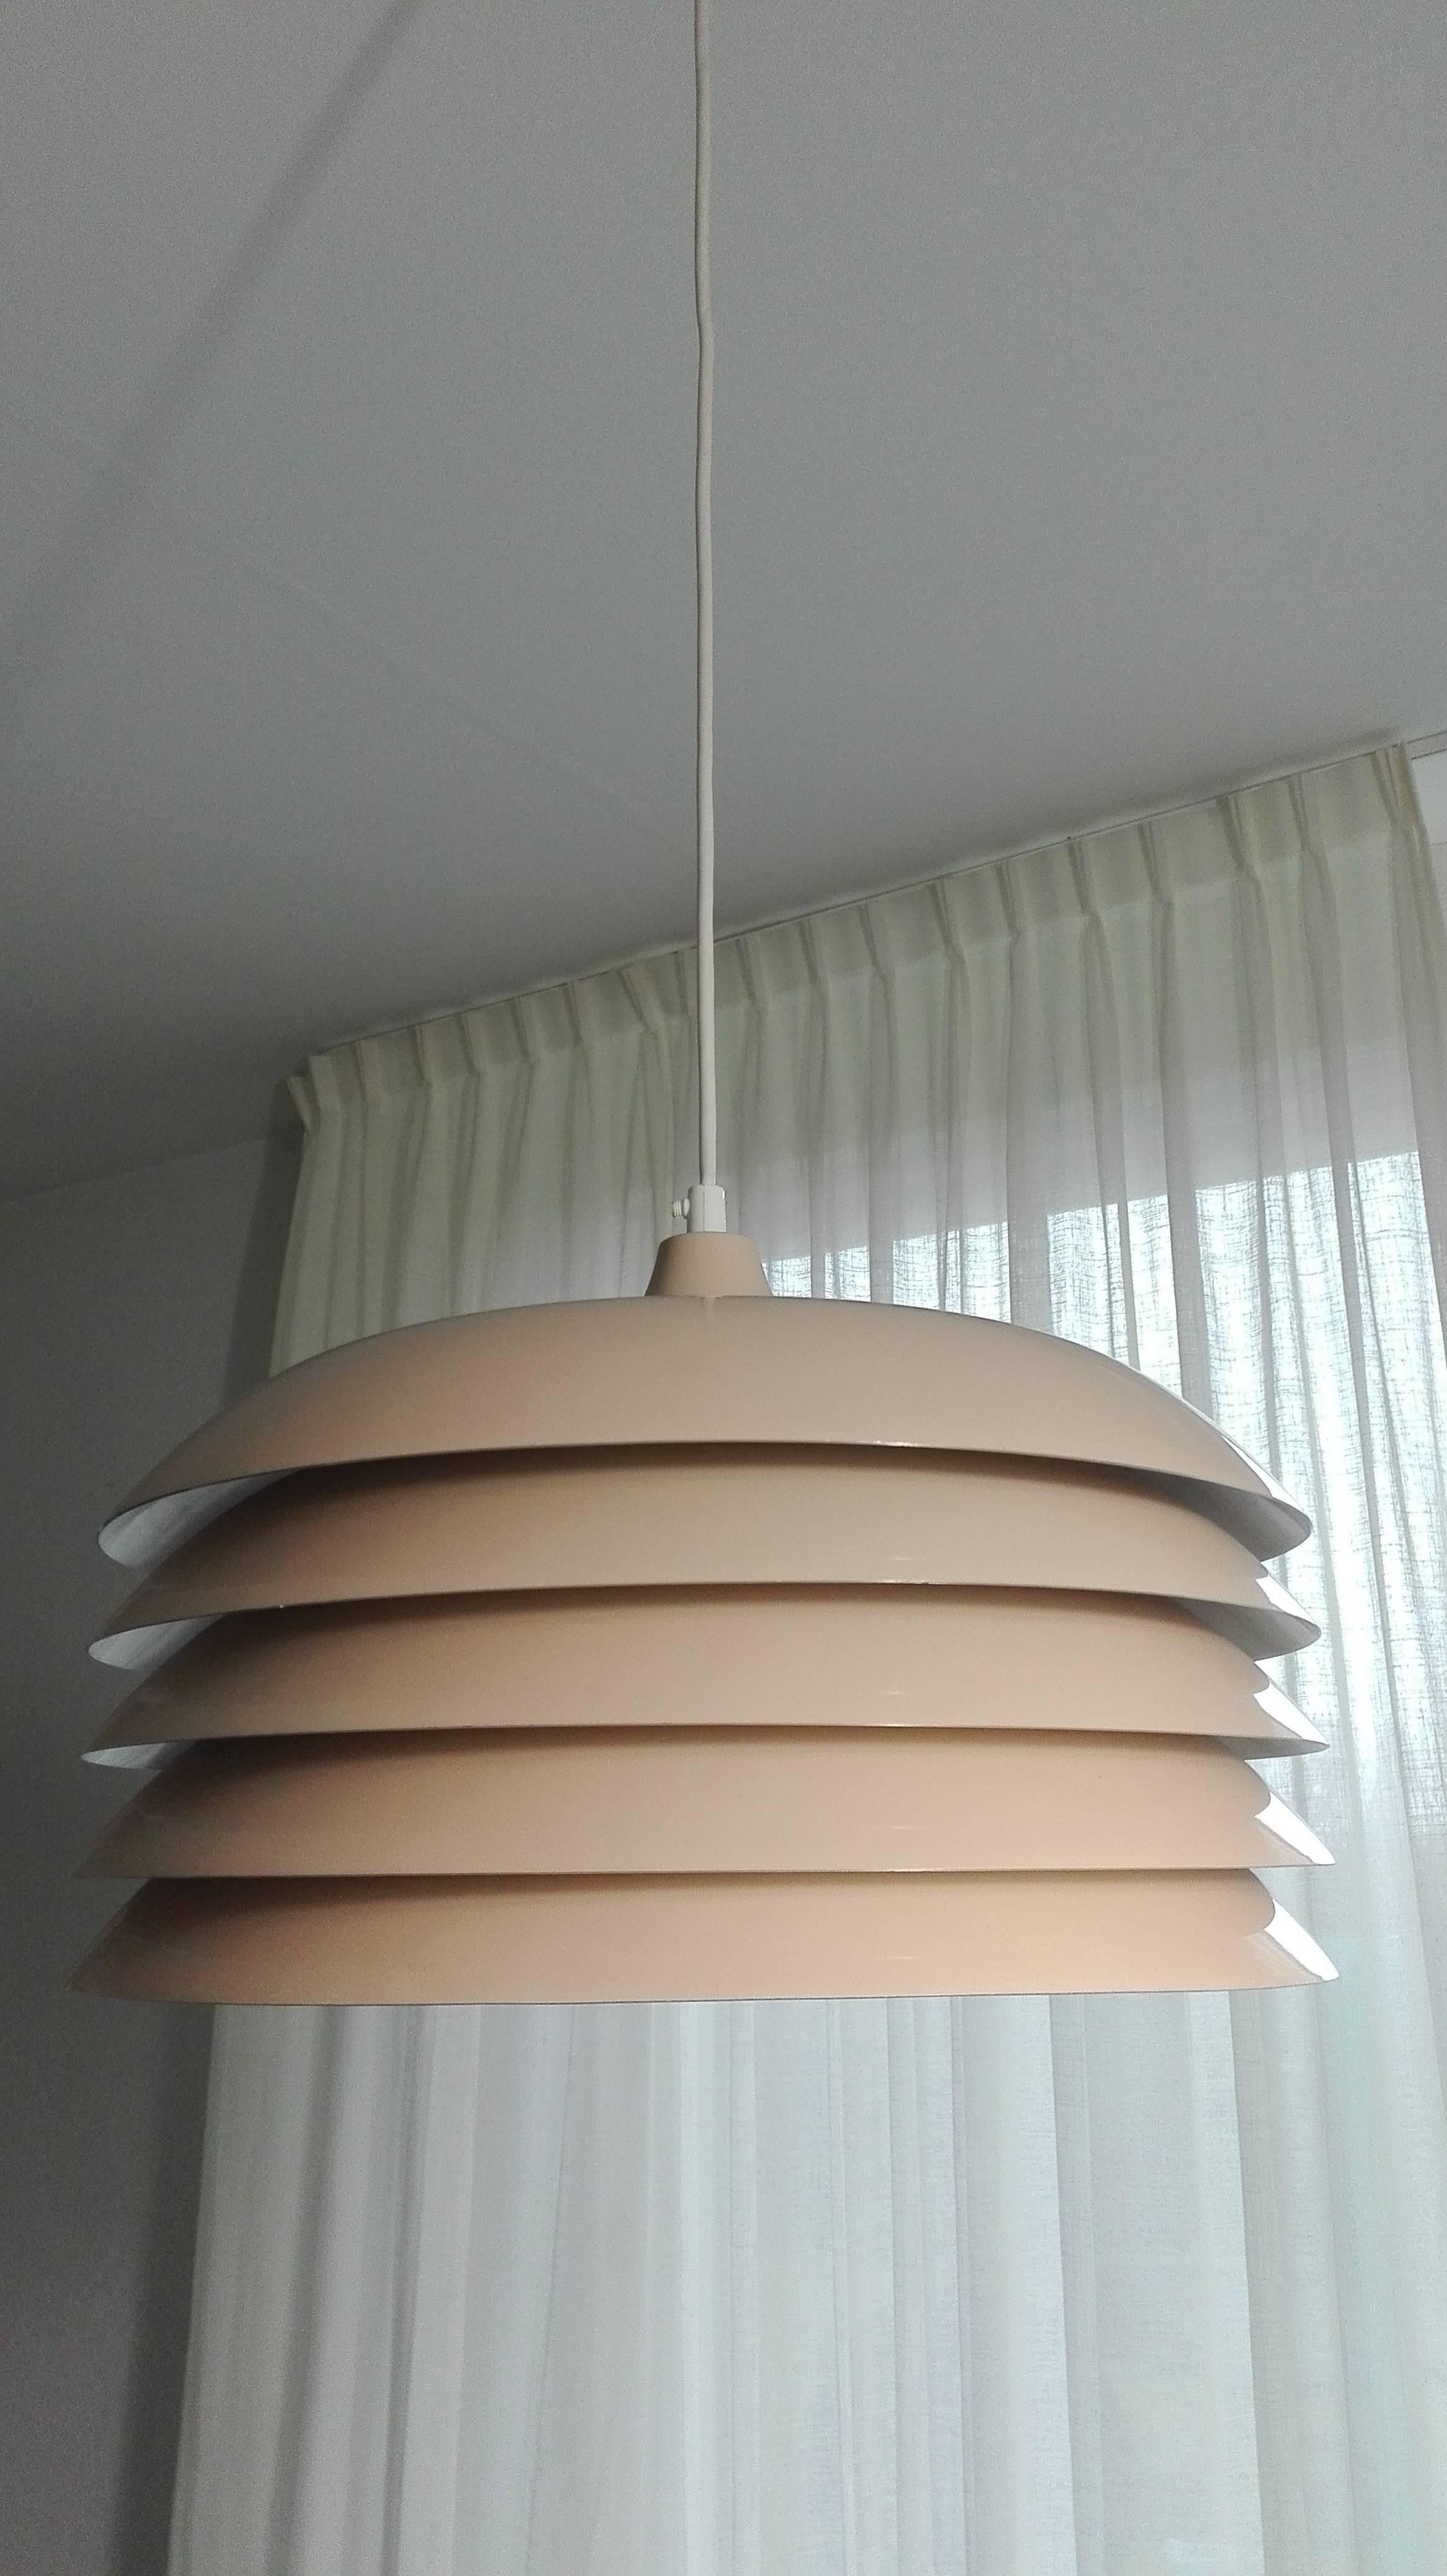 Hans Agne Jakobsson model T742 Pendant Light from the Lamingo series, produced by AB Markaryd in Sweden during the 1960's.
Very good condition!